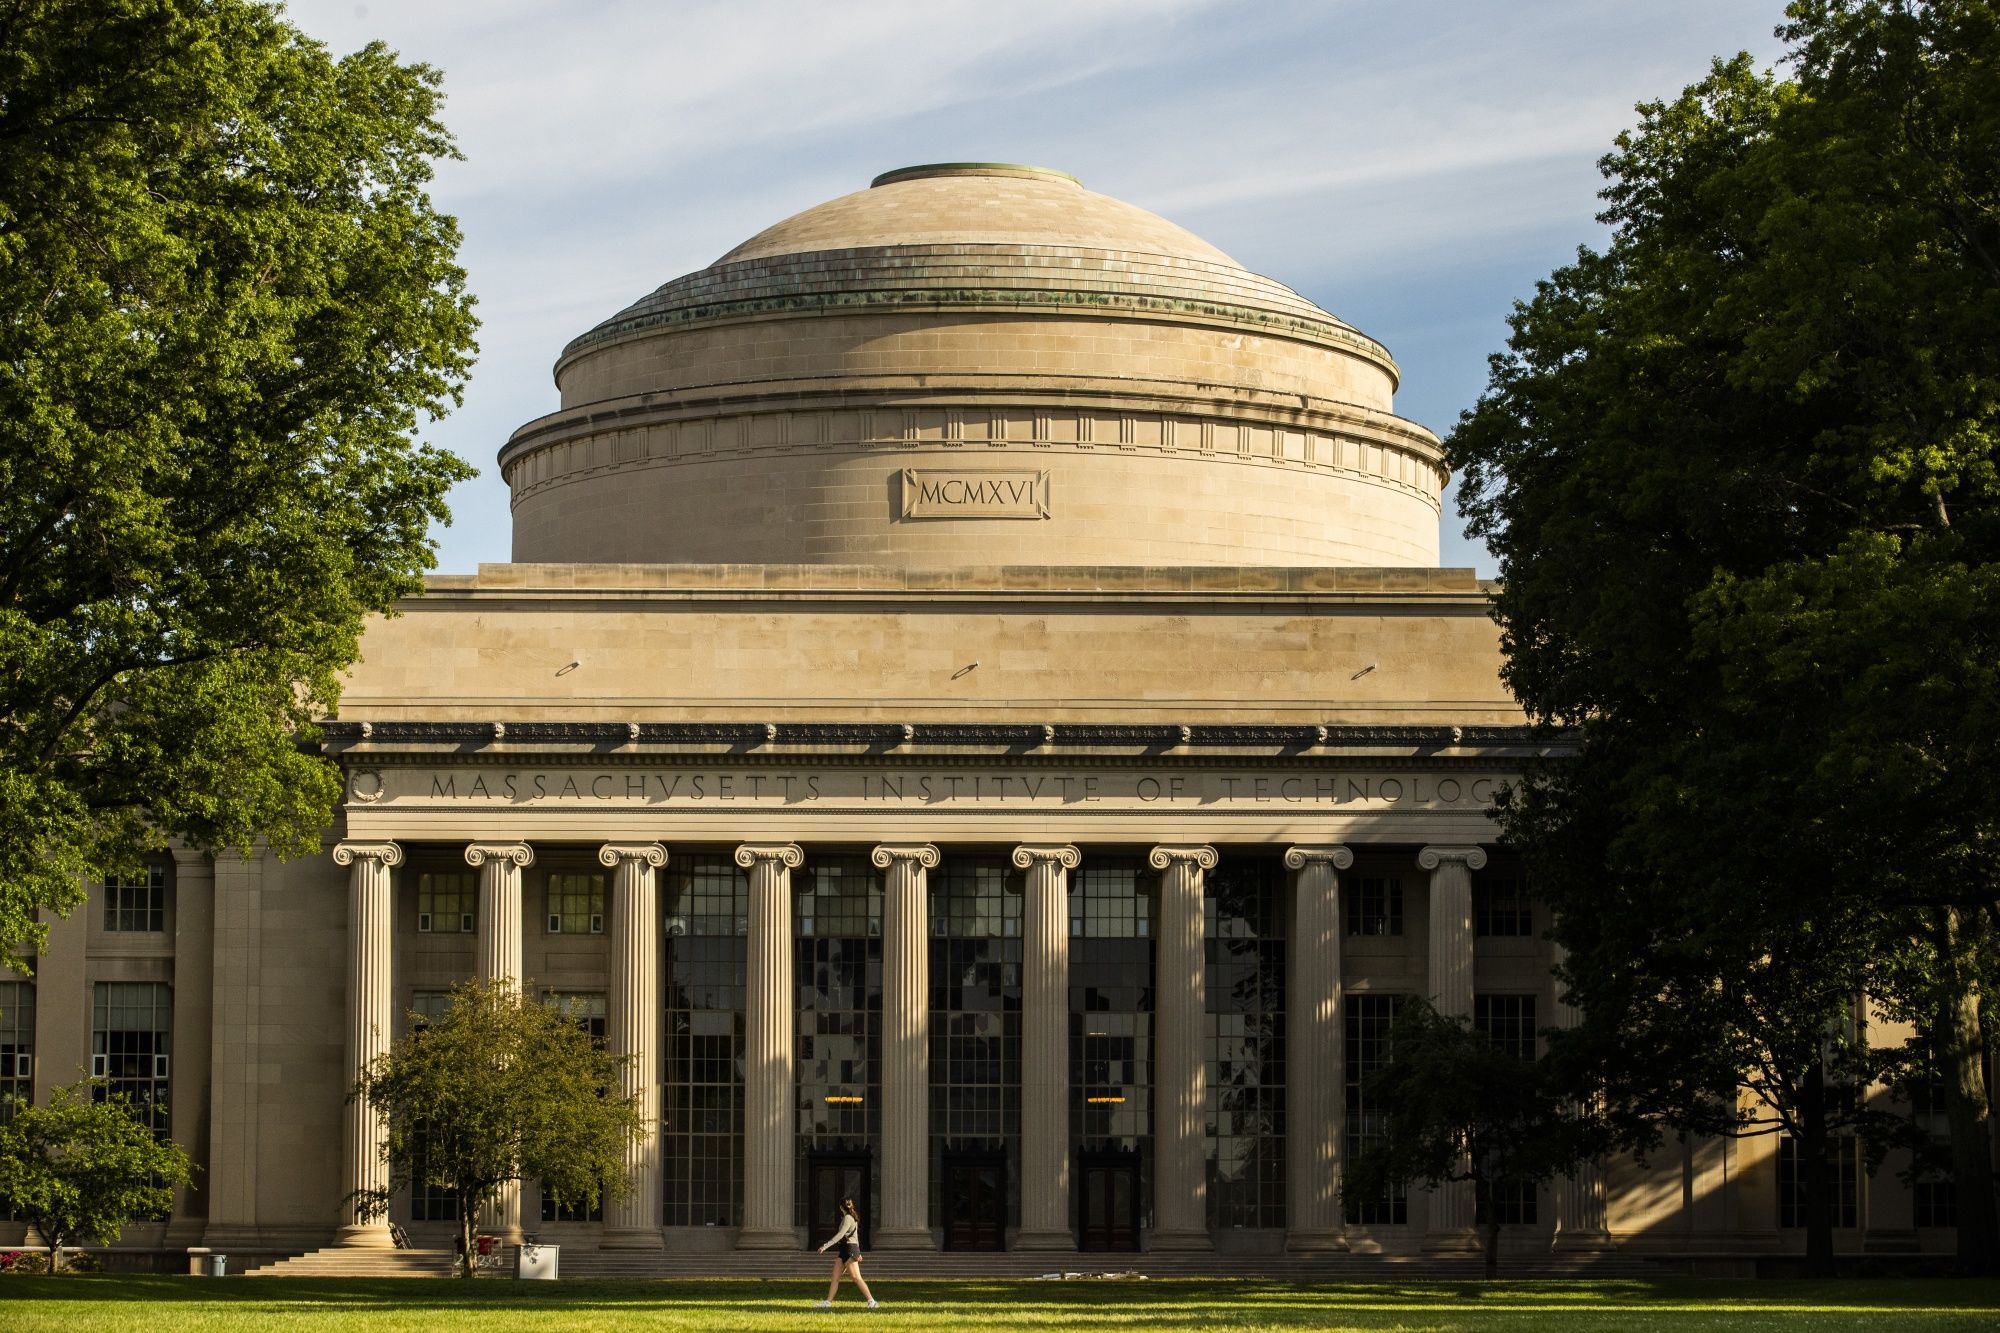 MIT releases early admission decisions in the most MIT way possible